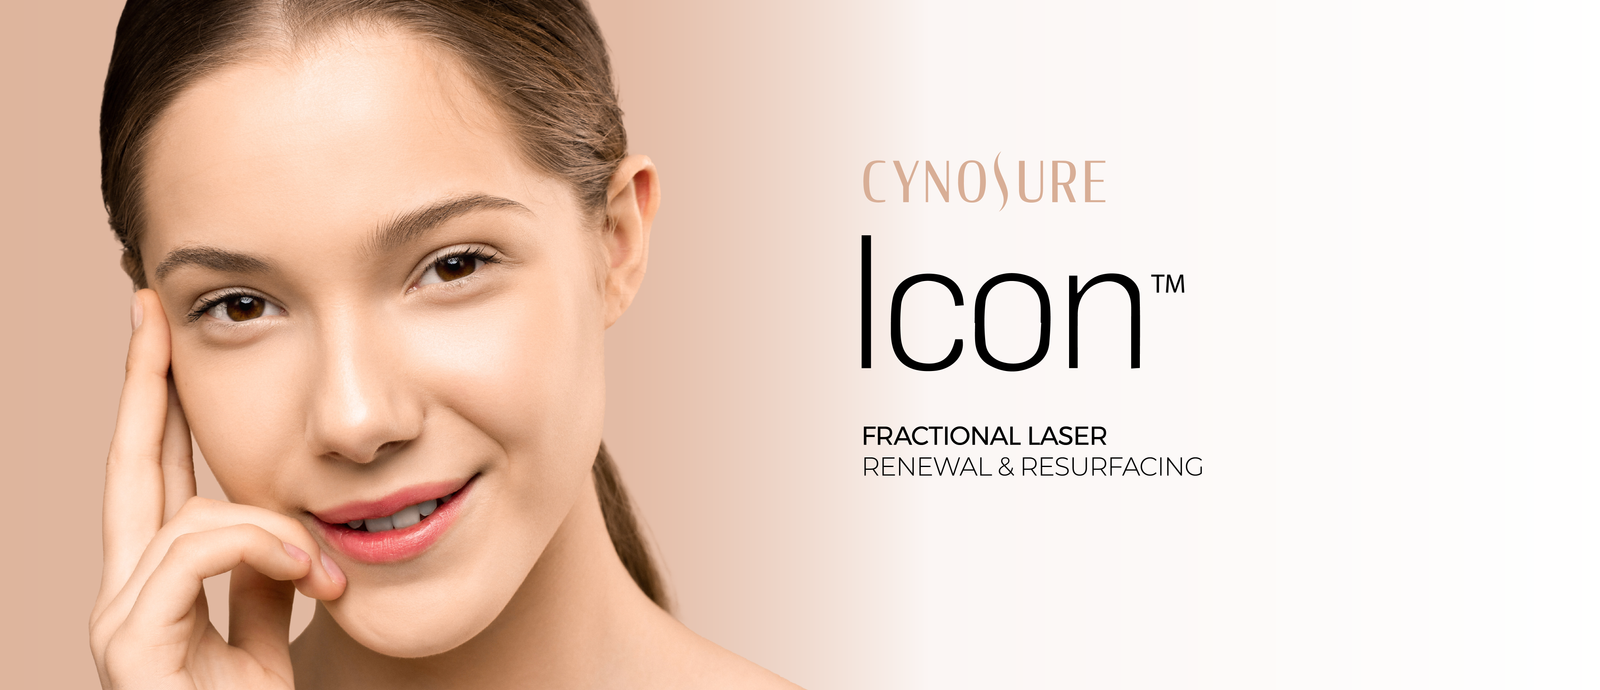 Fractional Laser Renewal & Resurfacing Treatment with ICON Laser Technology from Cynosure, available at Papillon Bleu Aesthetics in Coquitlam, British Columbia Canada